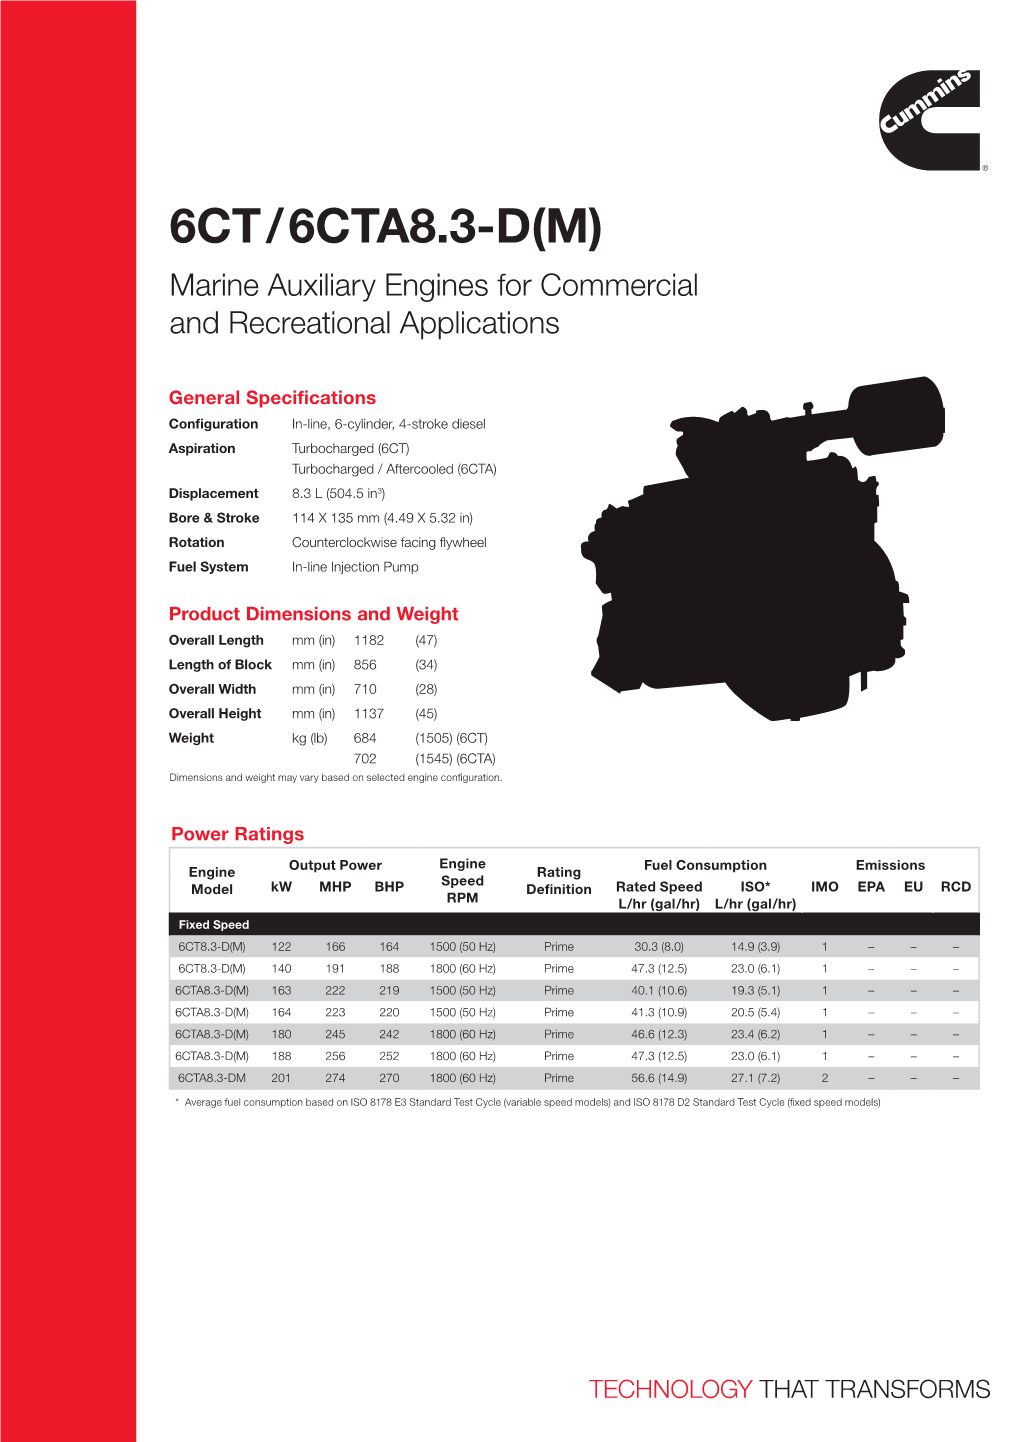 6CT/6CTA8.3-D(M) Marine Auxiliary Engines for Commercial and Recreational Applications